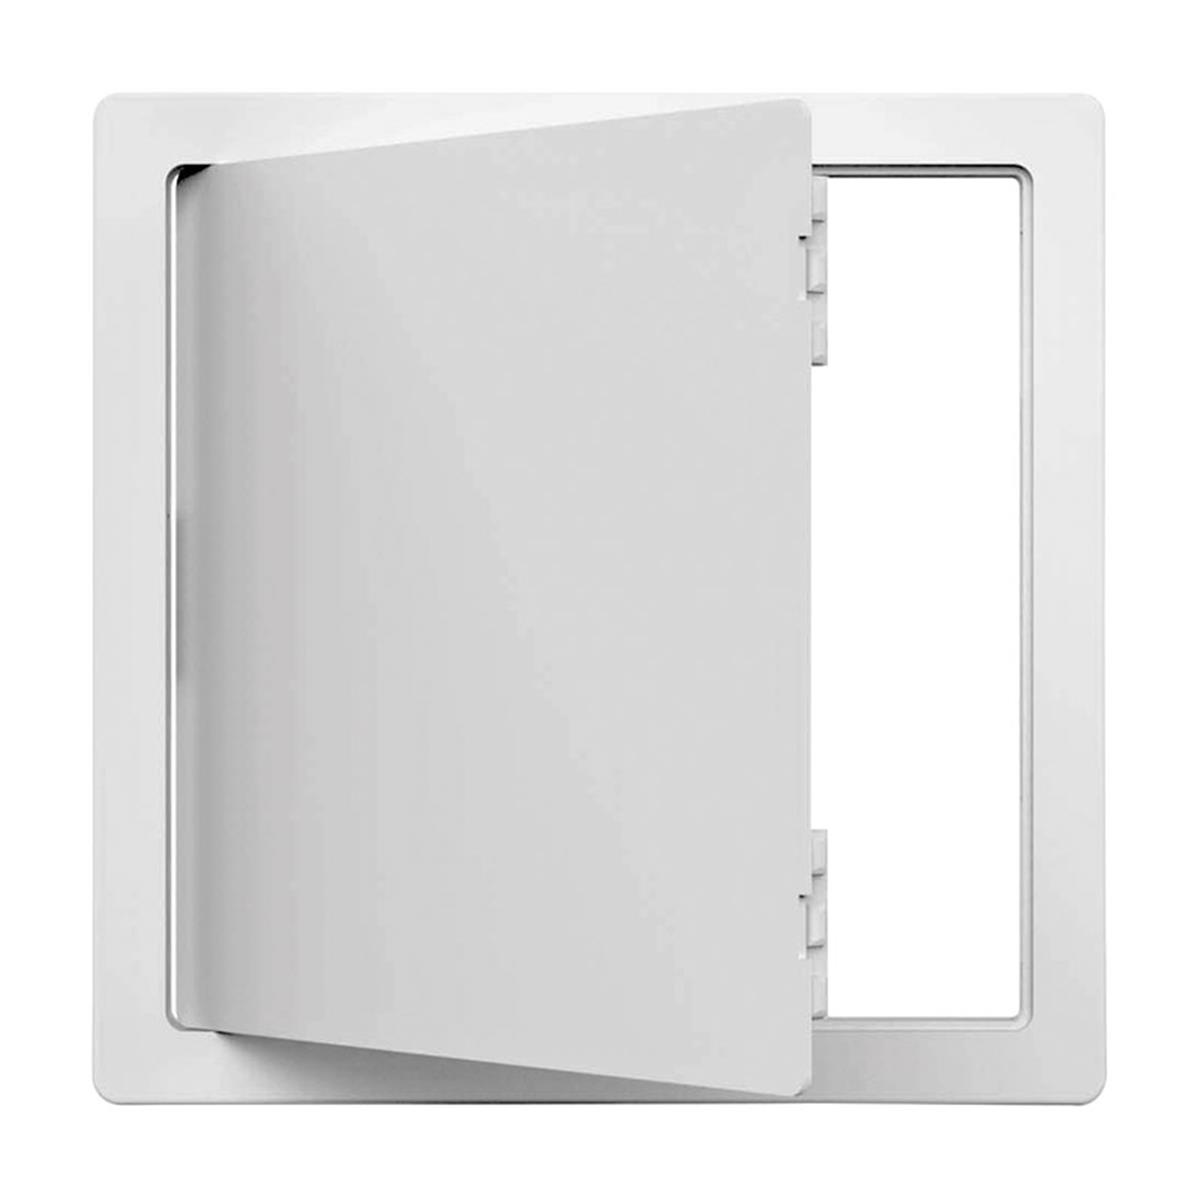 Picture of Acudor 4904017 PA-3000 Access Panel - Case of 12